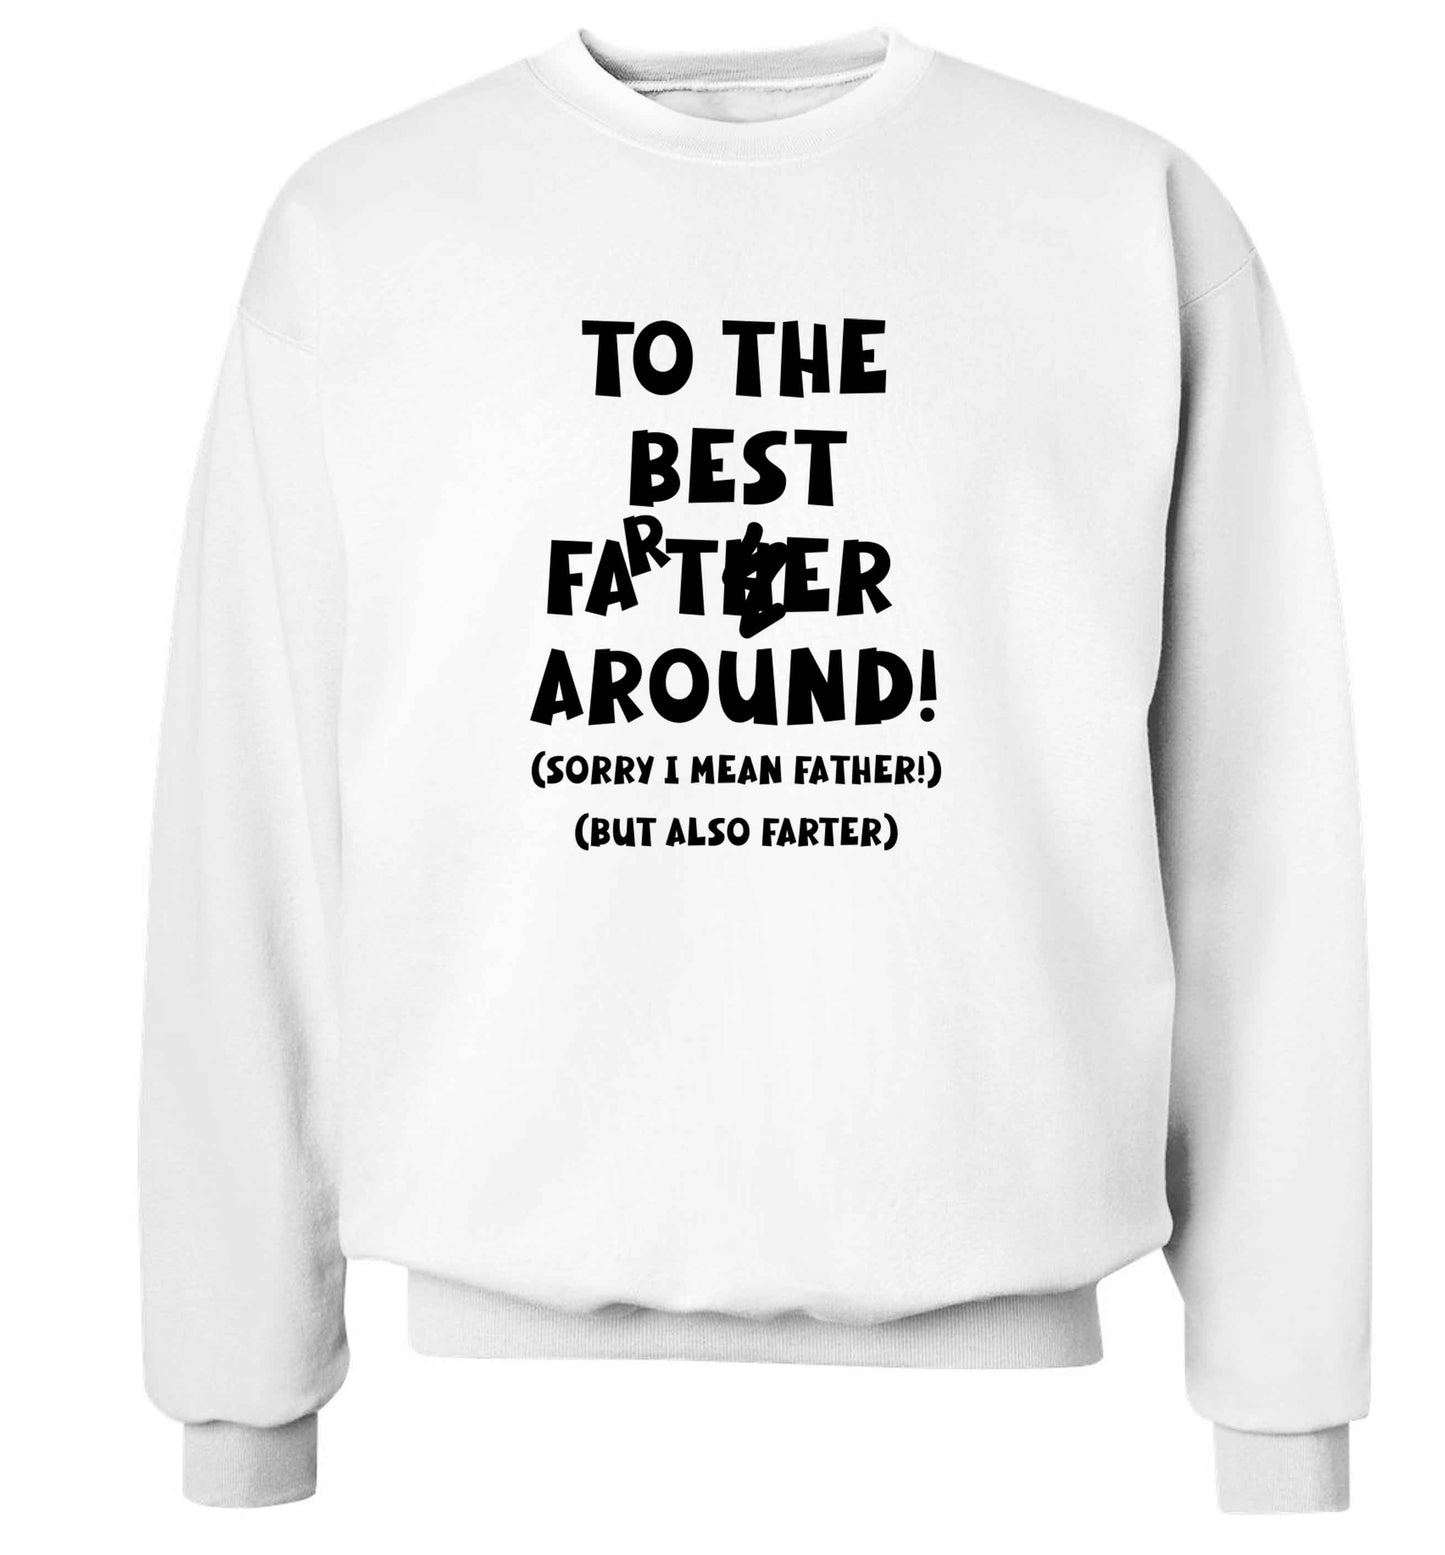 To the best farter around! Sorry I mean father, but also farter adult's unisex white sweater 2XL